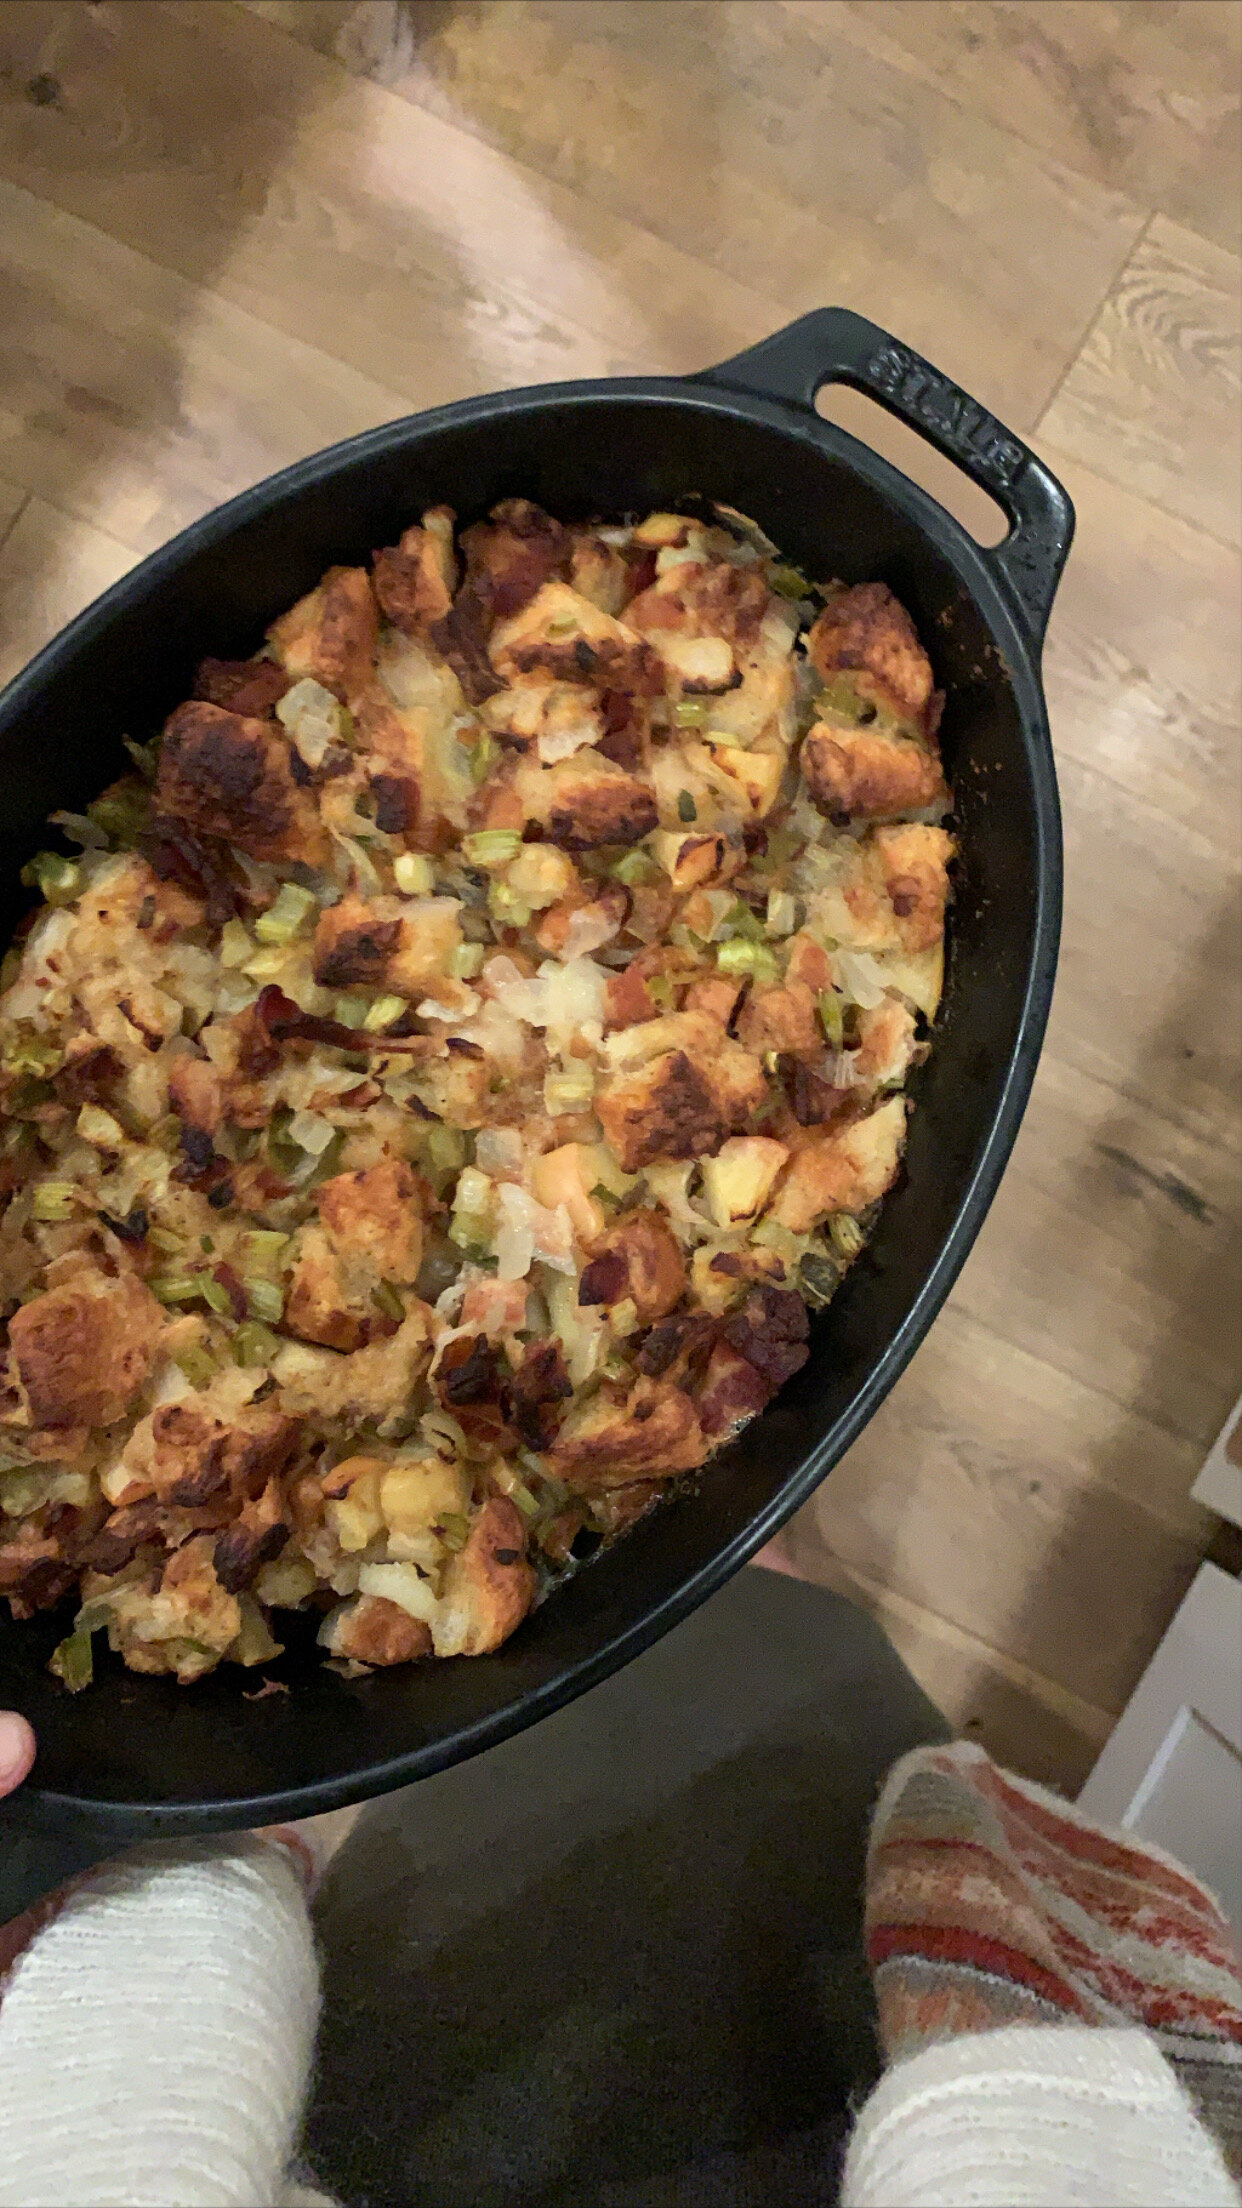 Stuffing is by far my favorite part of Thanksgiving dinner. Who doesn’t love a savory baked bread casserole? There’s a catch though, I really dislike sausage, and many stuffing recipes include sausage in them. I can pick through a sausage filled stuffing, but my favorite kind is made without it. 